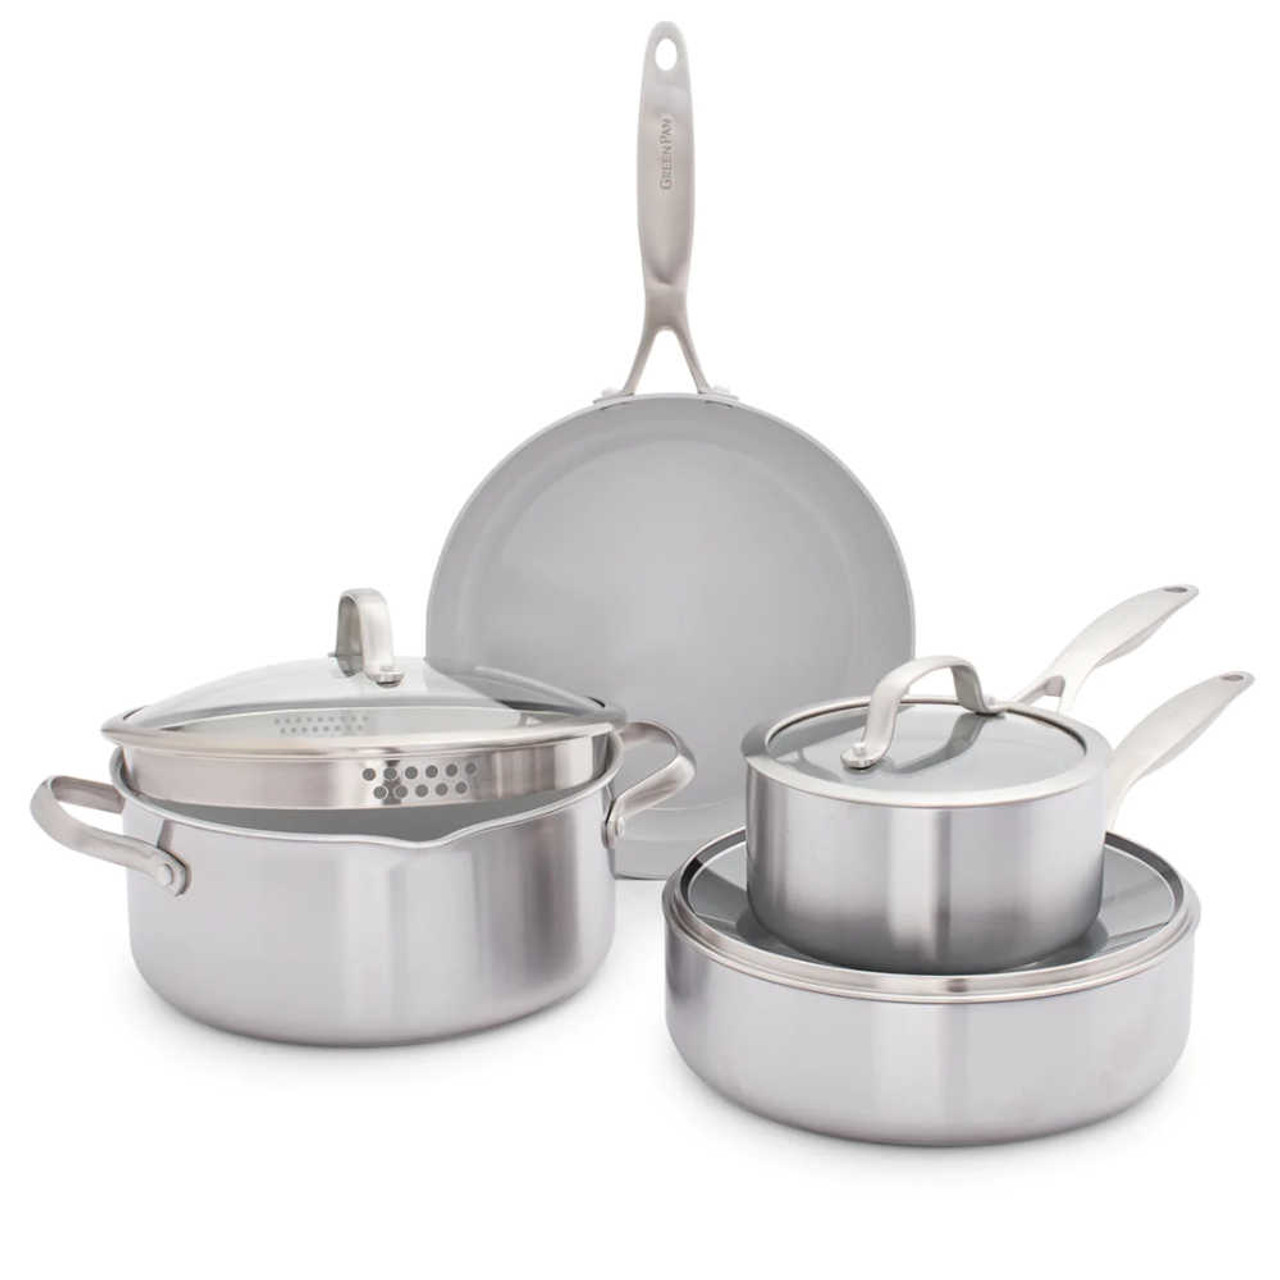 Chantal Induction 21 7 piece Stainless Steel Cookware set with Ceramic  Non-Stick Coating